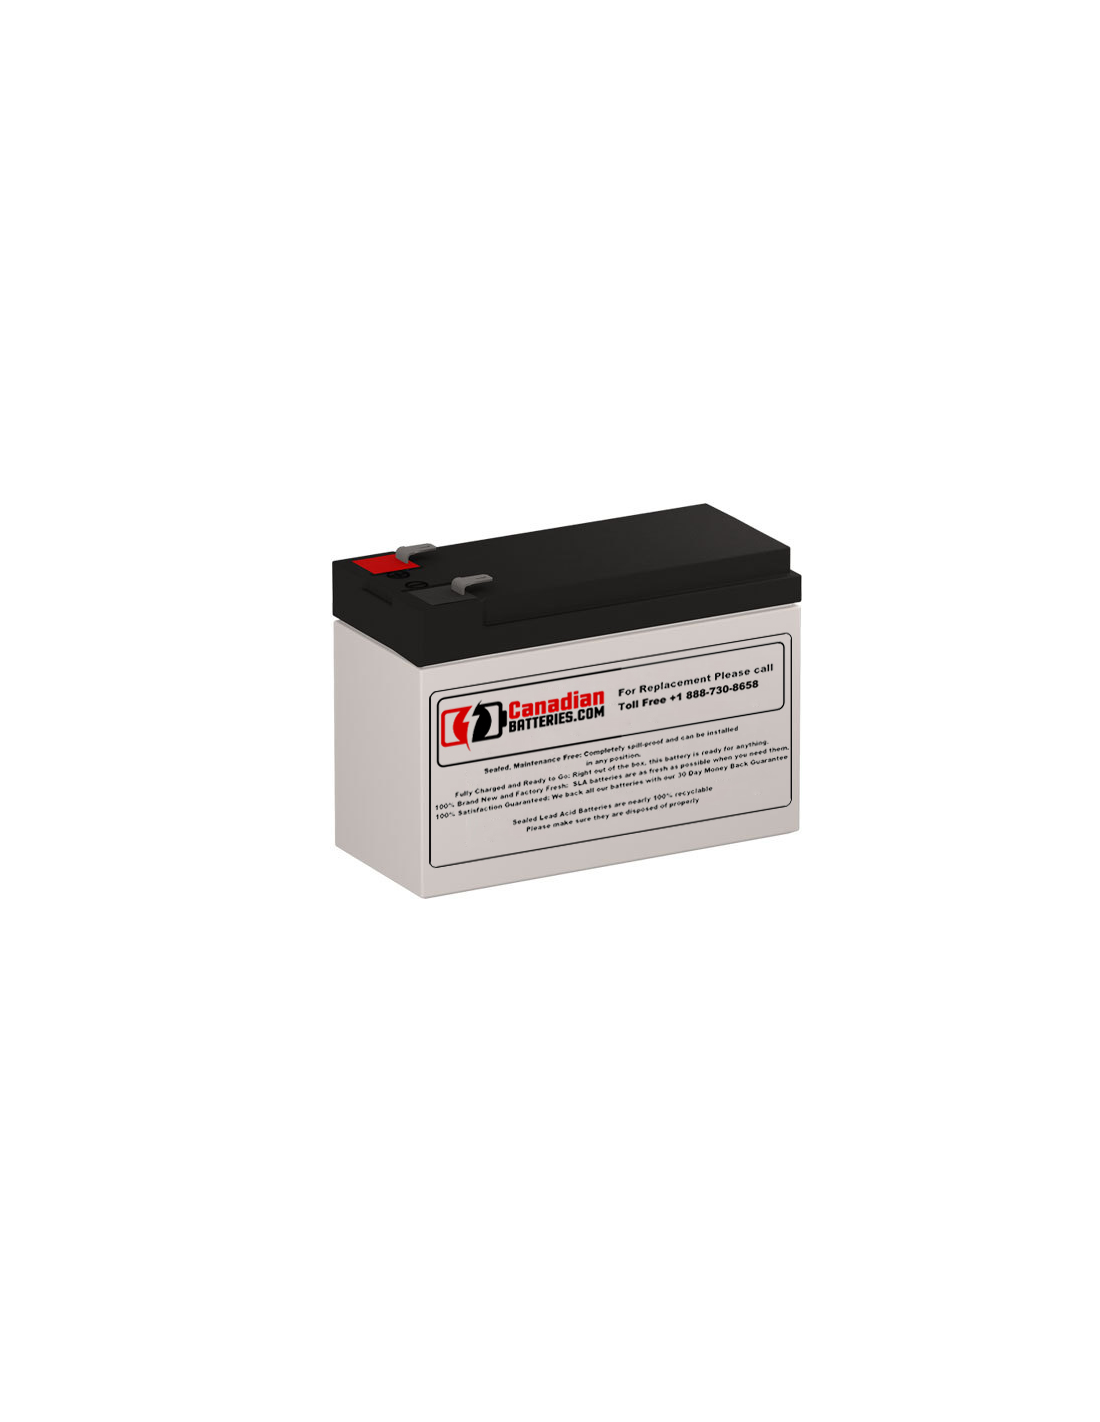 Batteries for Mit'subishi 7011a-100 UPS, 36 x 12V, 7Ah - 84Wh